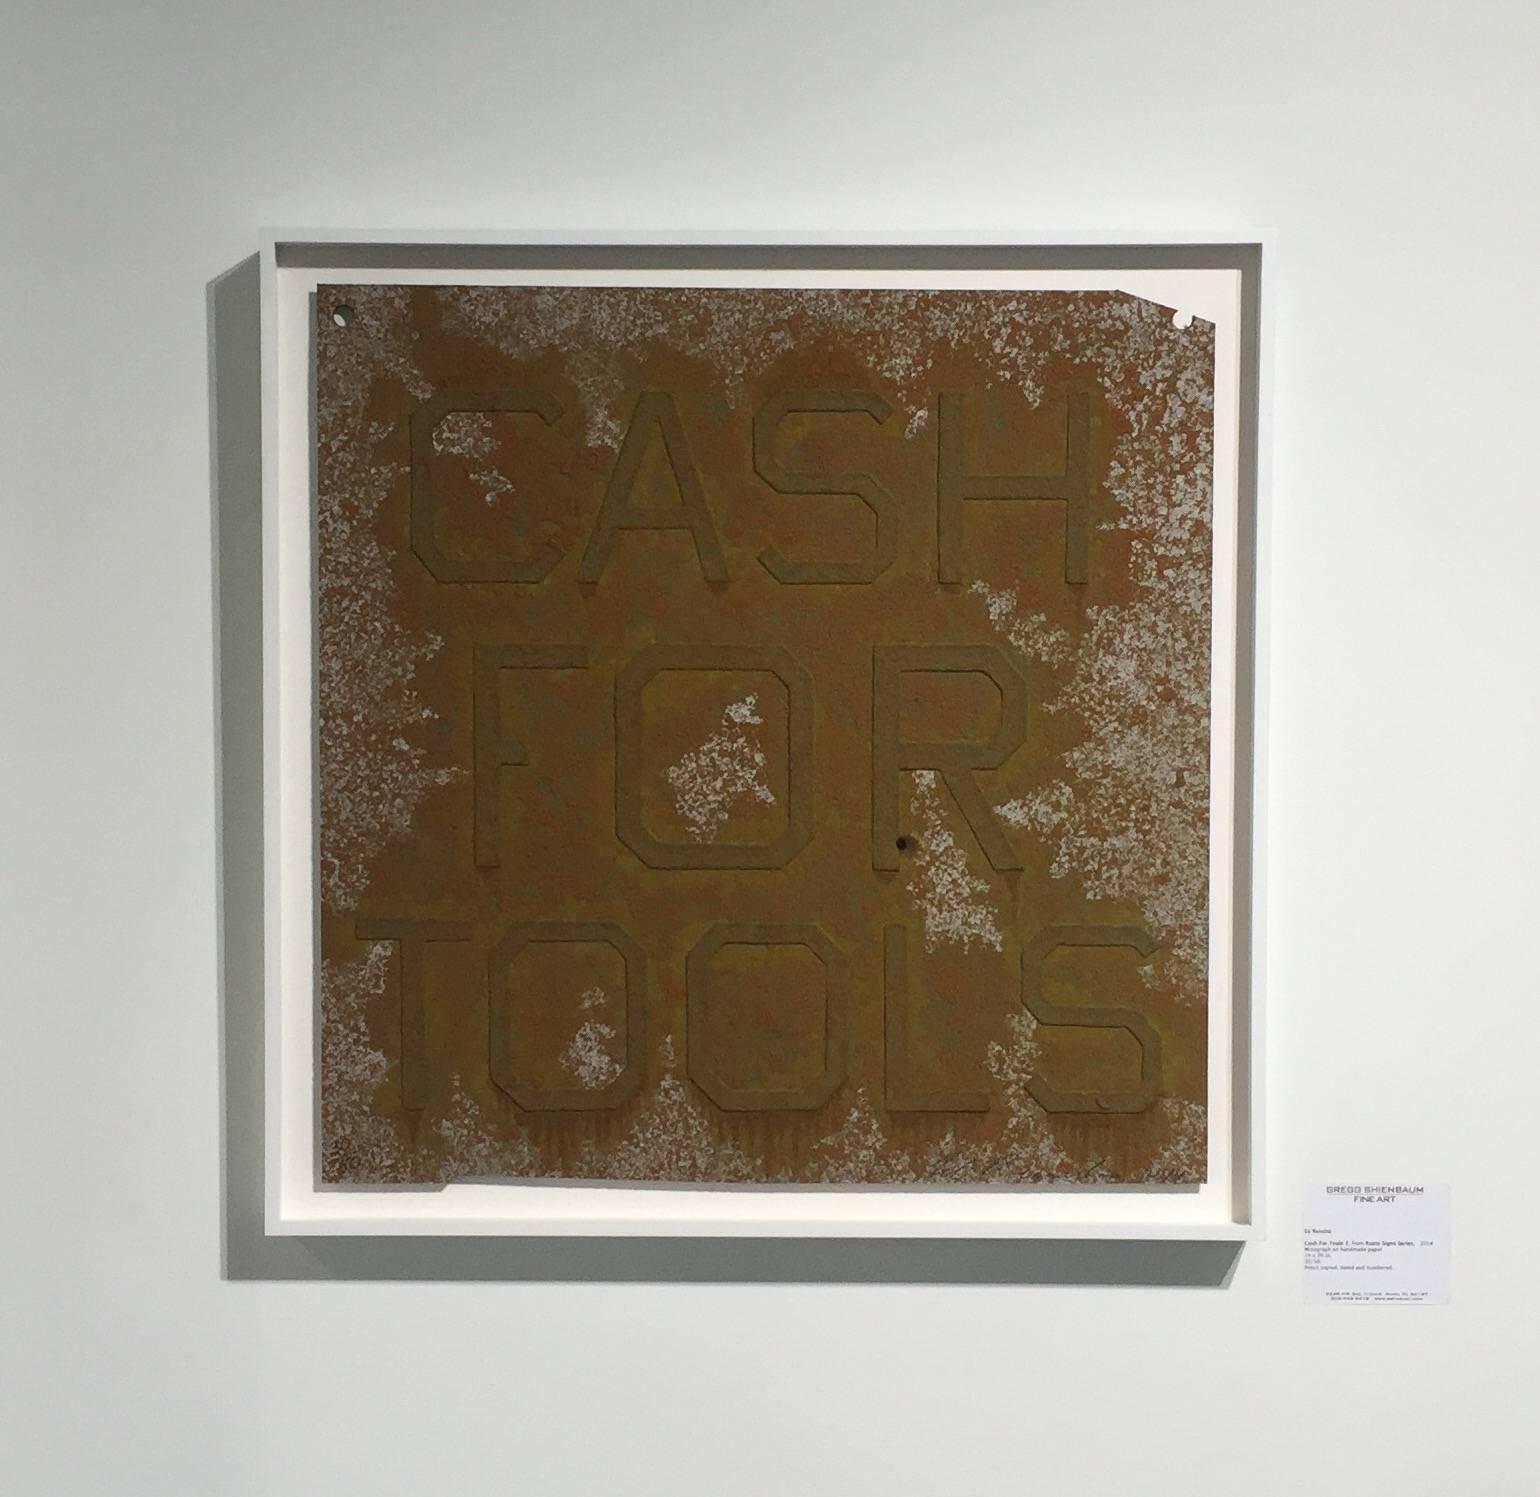 Cash For Tools 2 - Print by Ed Ruscha